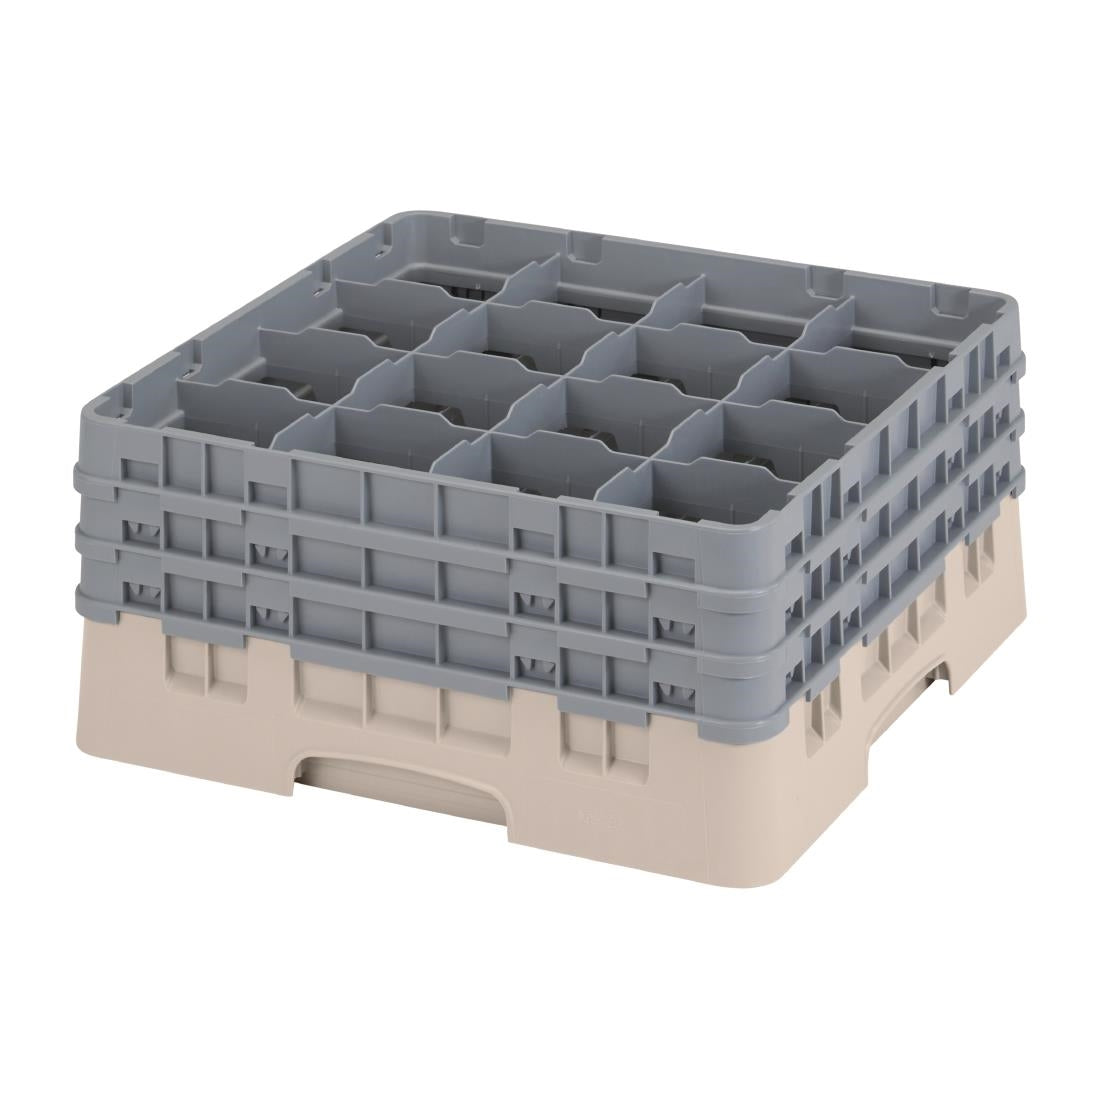 FD065 Cambro Camrack Beige 16 Compartments Max Glass Height 196mm JD Catering Equipment Solutions Ltd